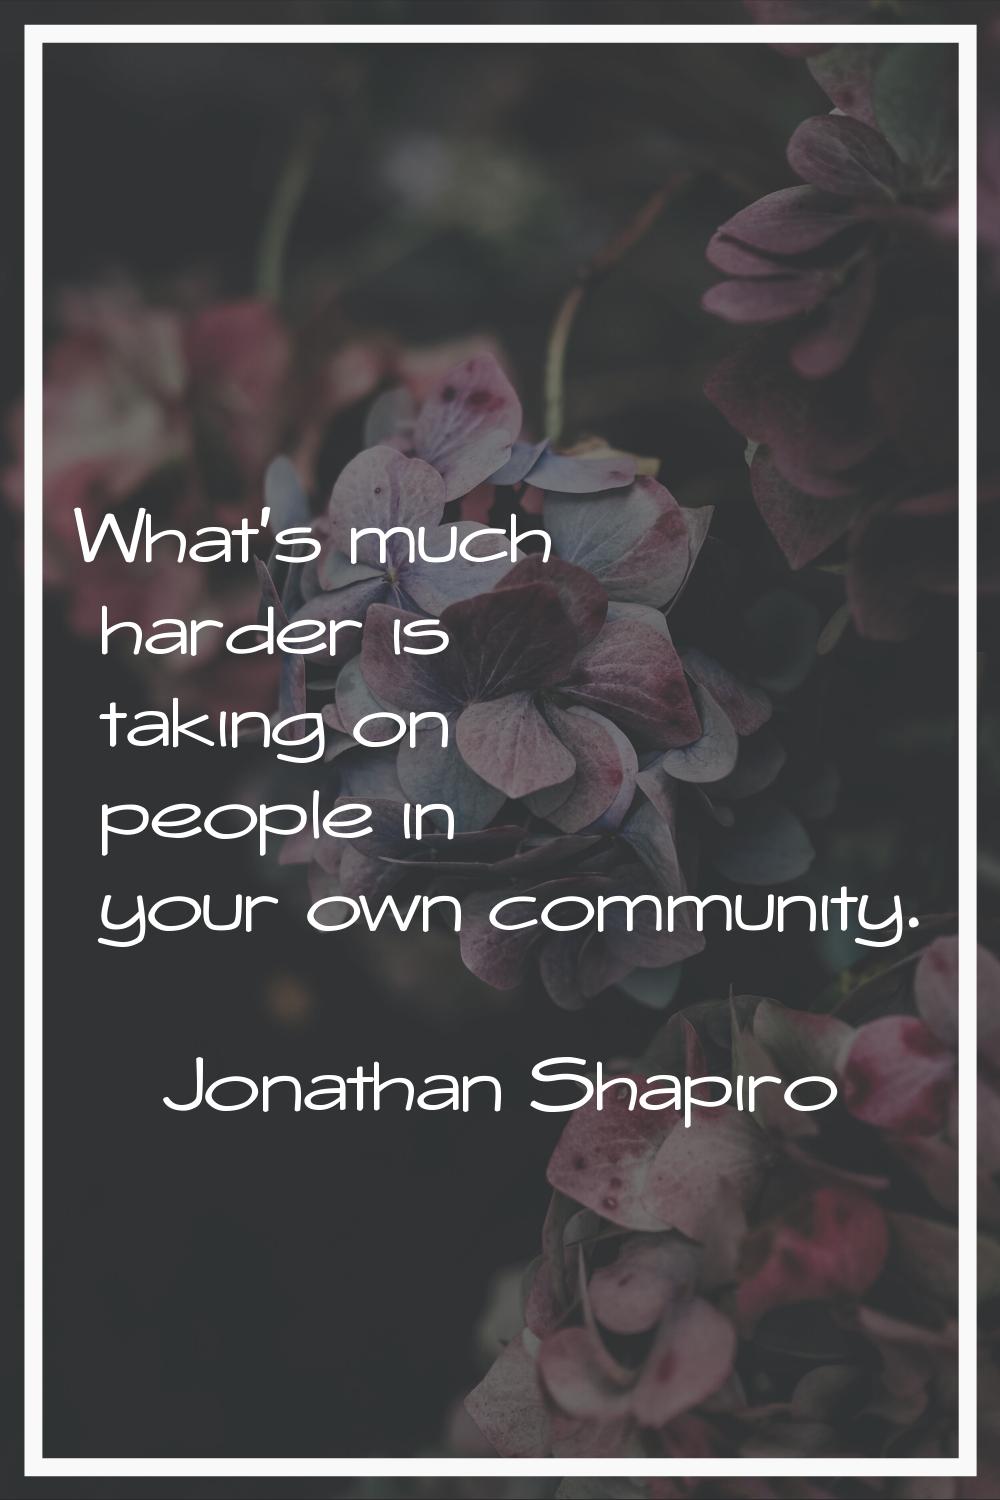 What's much harder is taking on people in your own community.